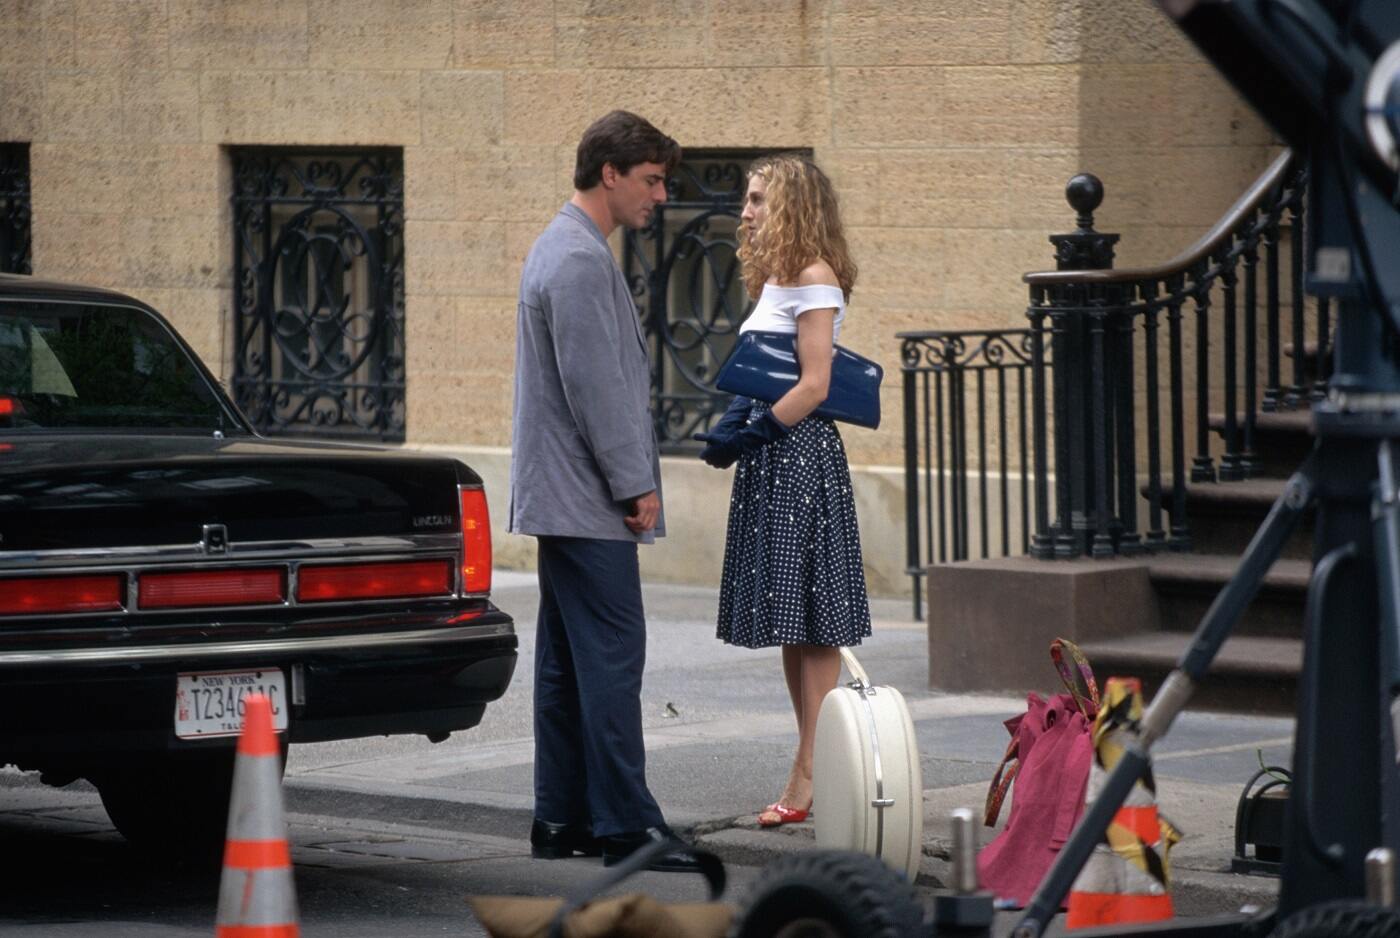 Chris Noth as Mr. Big and Sarah Jessica Parker as Carrie Bradshaw stand in front of her apartment in season 1 of 'Sex and the City'